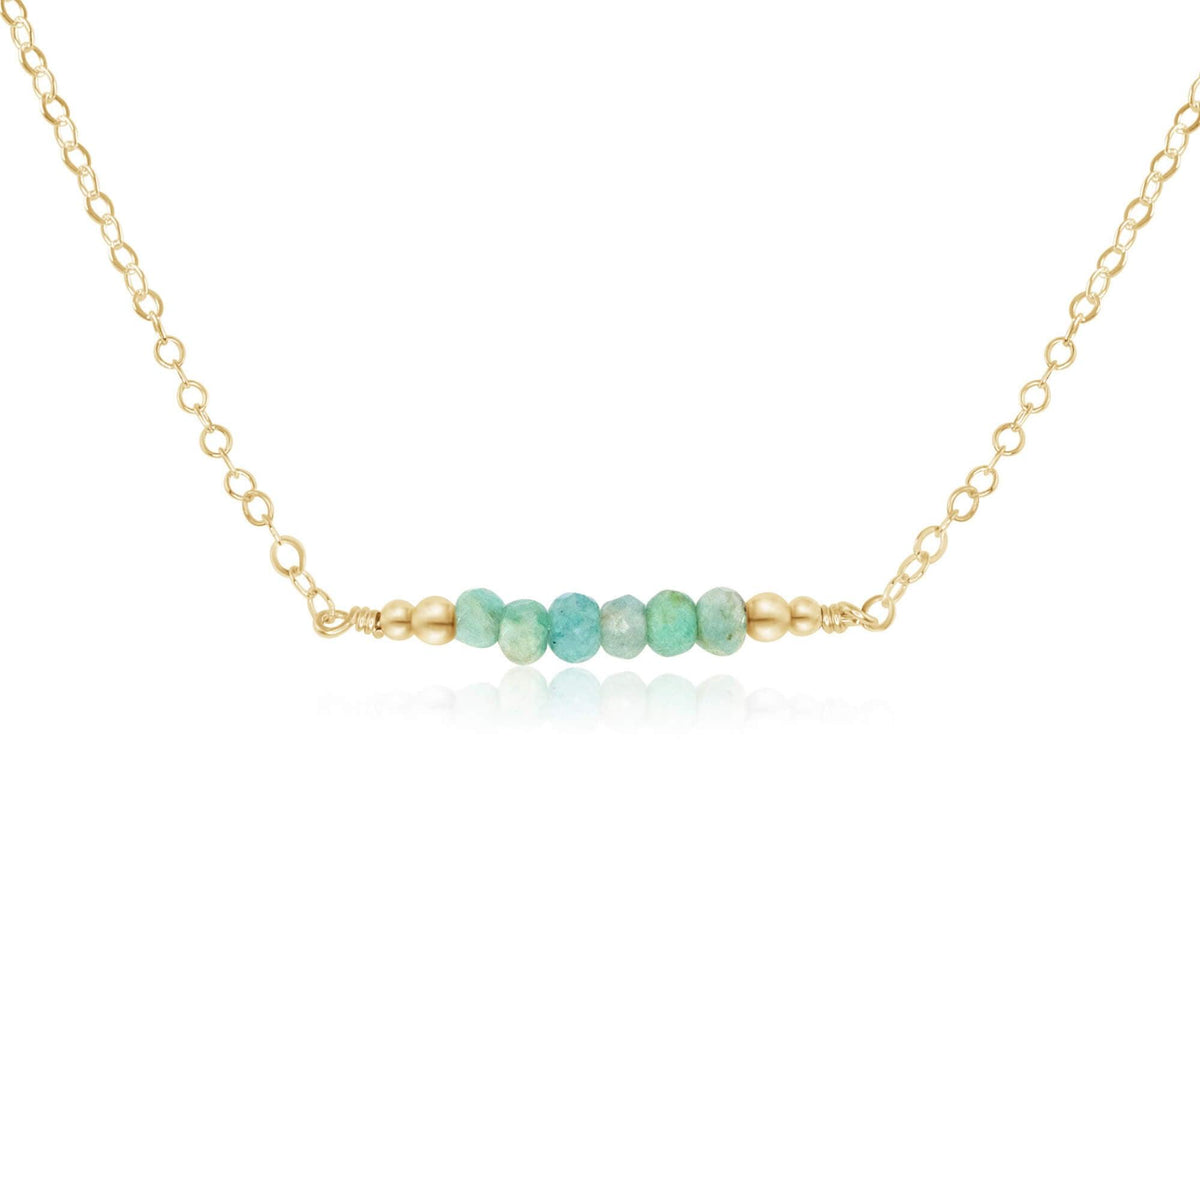 Faceted Bead Bar Necklace - Amazonite - 14K Gold Fill - Luna Tide Handmade Jewellery